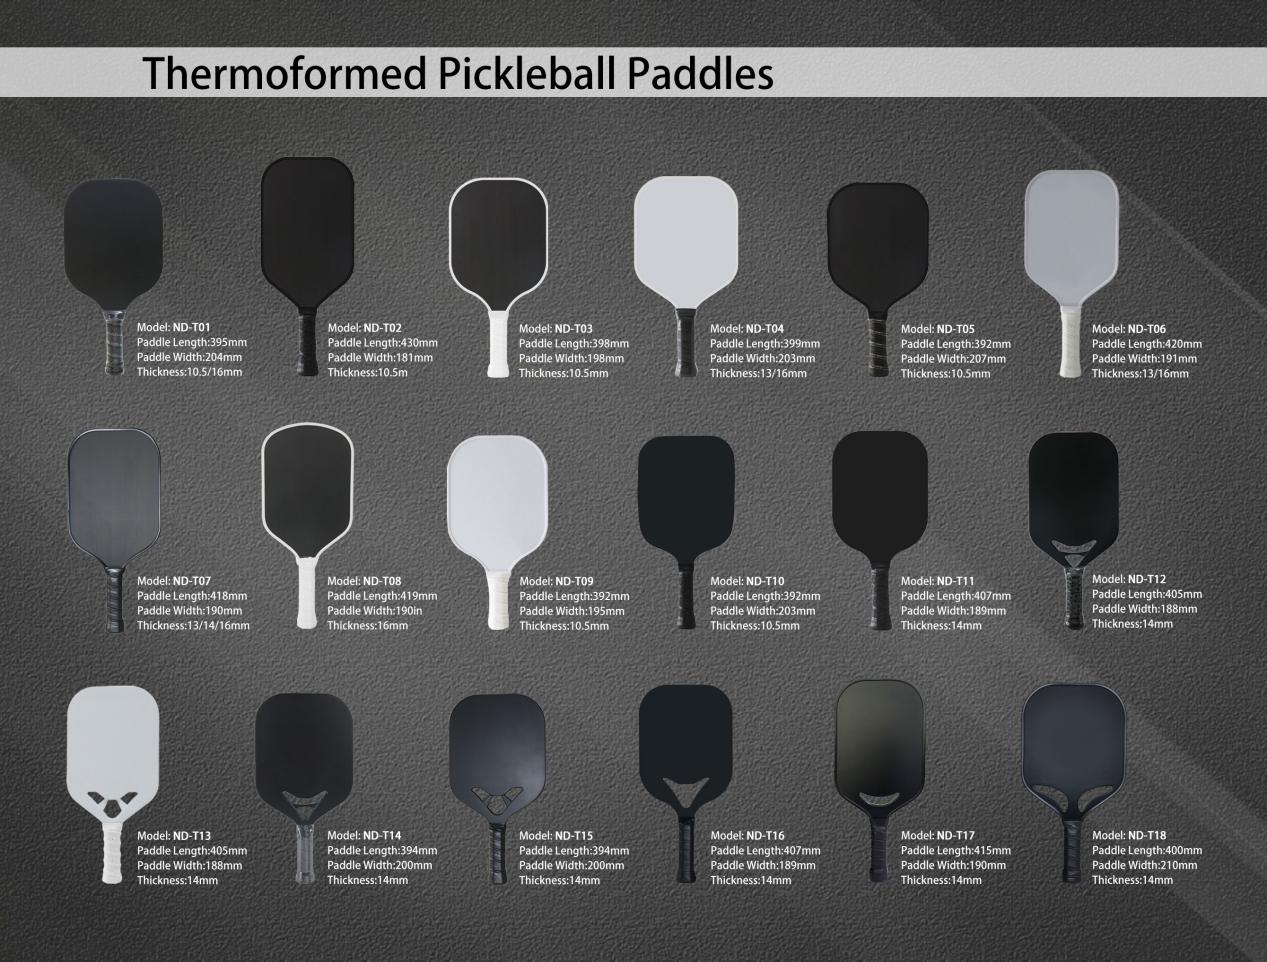 Advantages of the thermoformed pickleball paddle